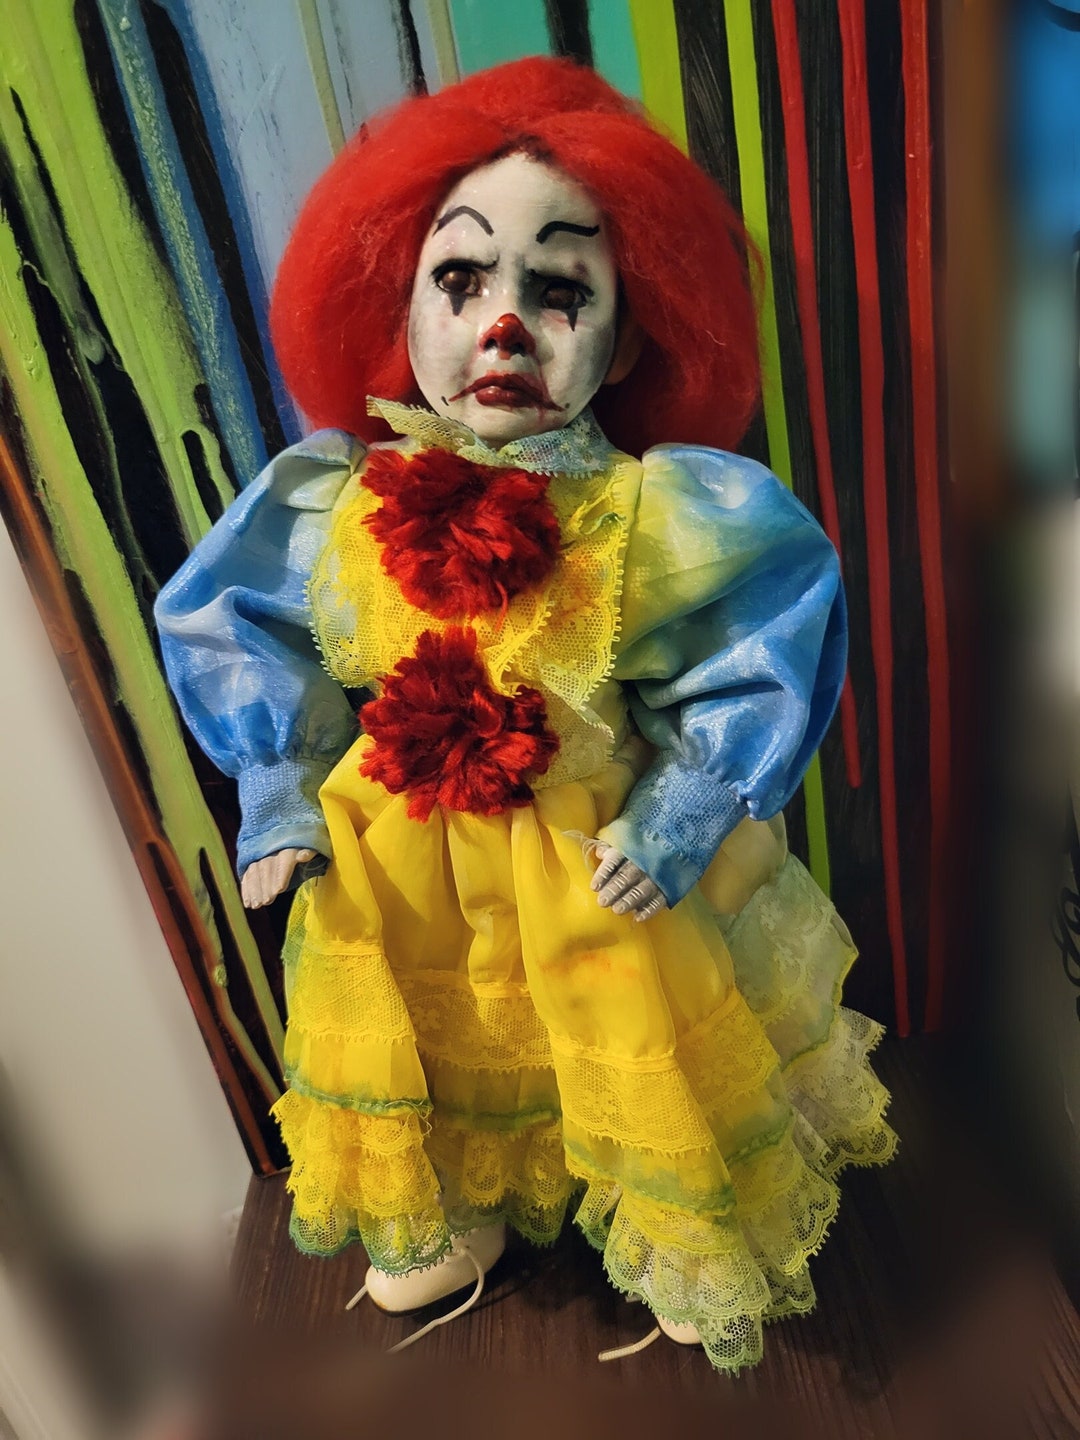 IT Pennywise Clown Doll - Etsy